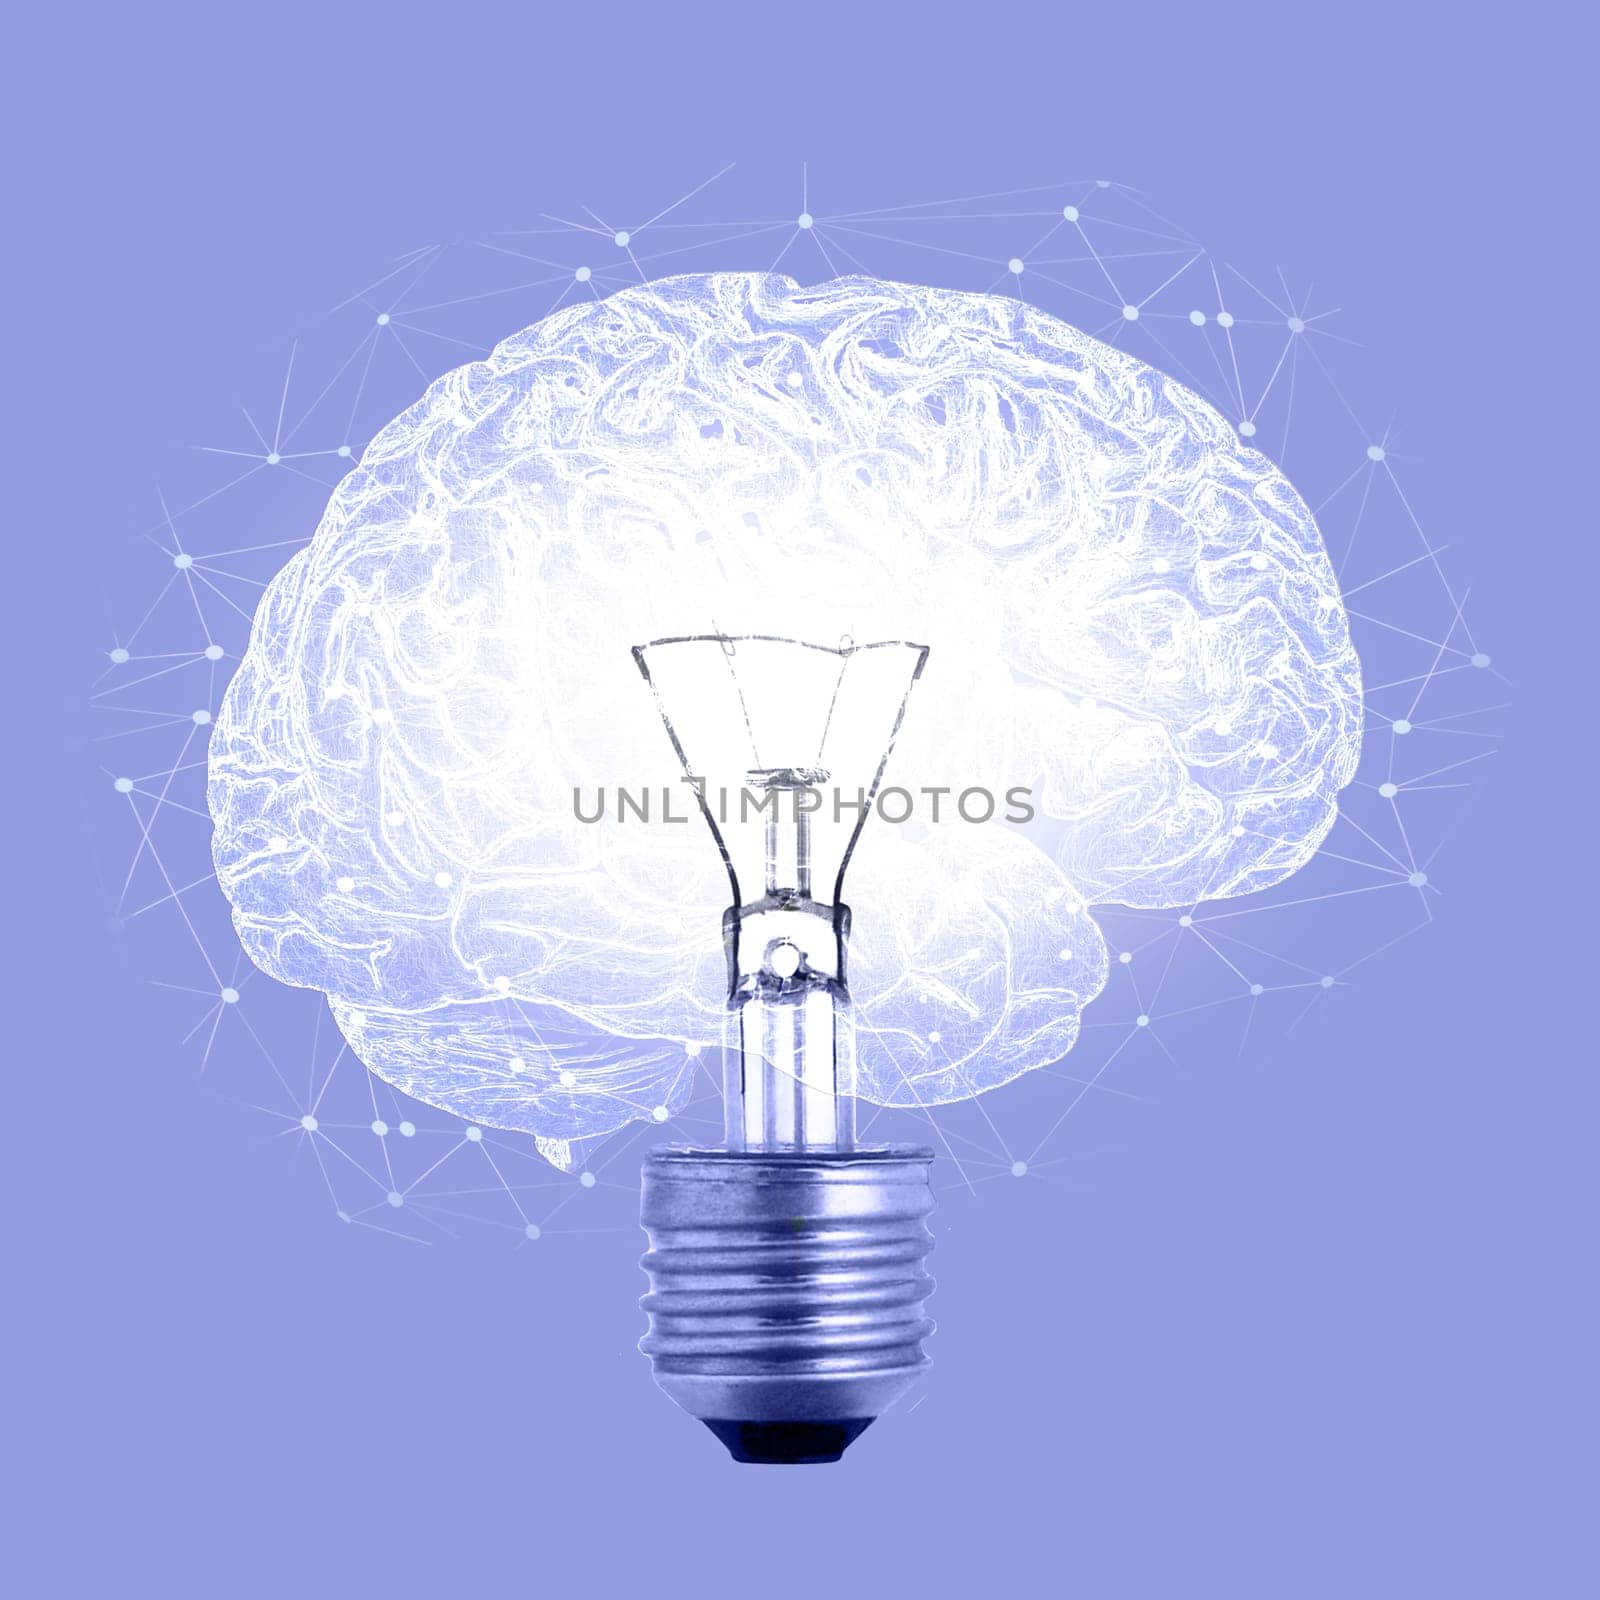 Lightbulb brain abstract, idea and thinking for creative innovation, strategy and solution with vision. Mindset, mind power and neurological science for natural energy network, brainstorming or ideas.